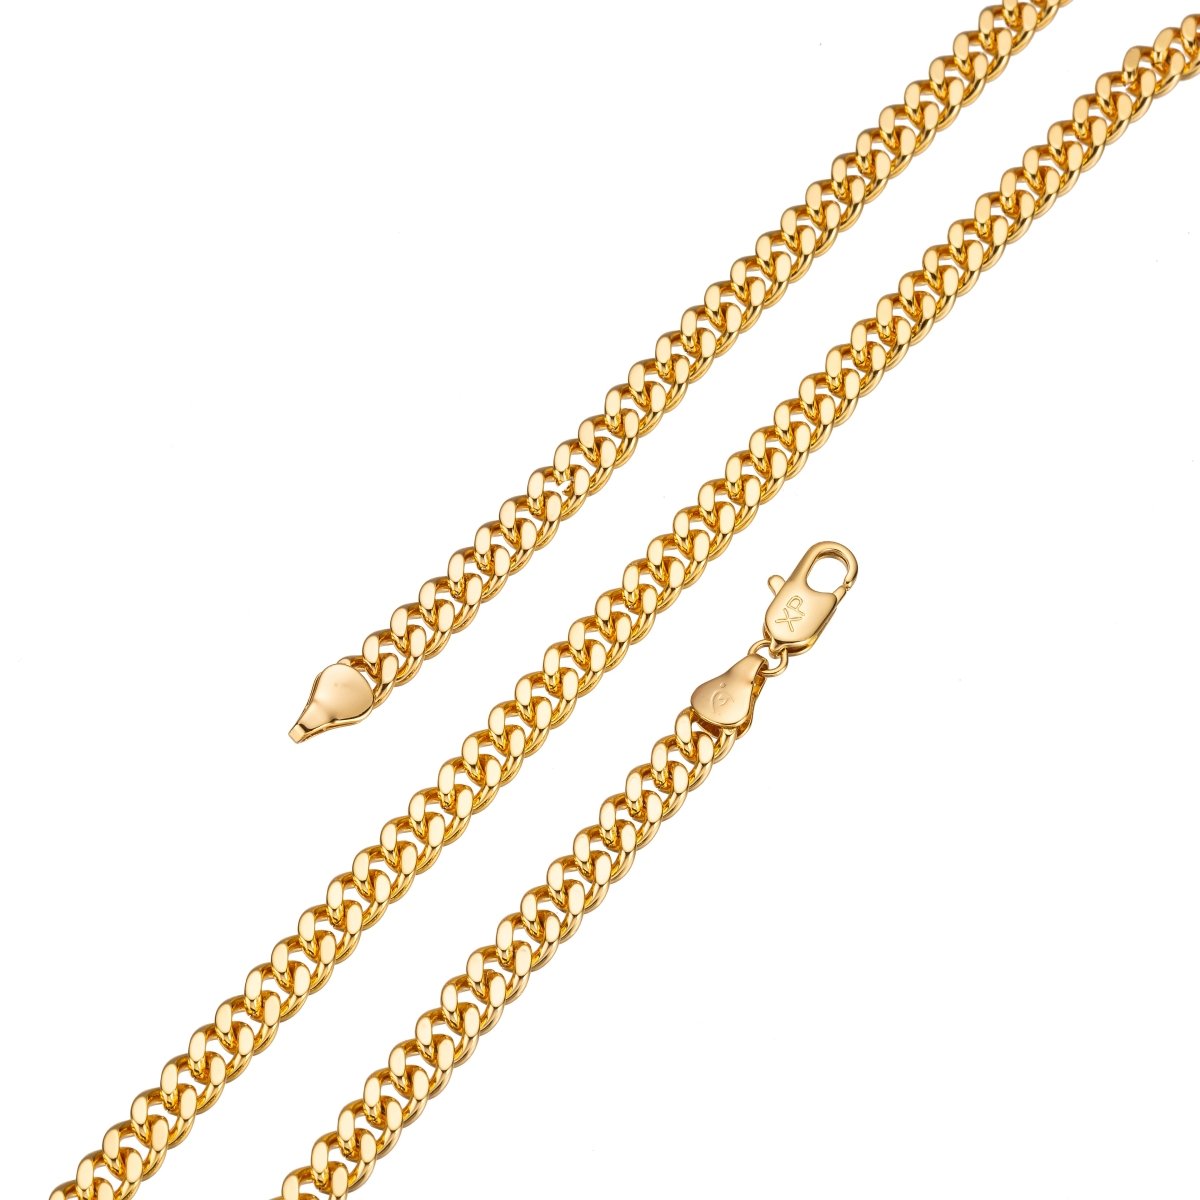 24K Gold Plated Curb Chain Necklace, 19.9 inches Curb Finished Necklace, 2.9mm Width Curb Necklace w/ Lobster Clasps | CN-967 Clearance Pricing - DLUXCA